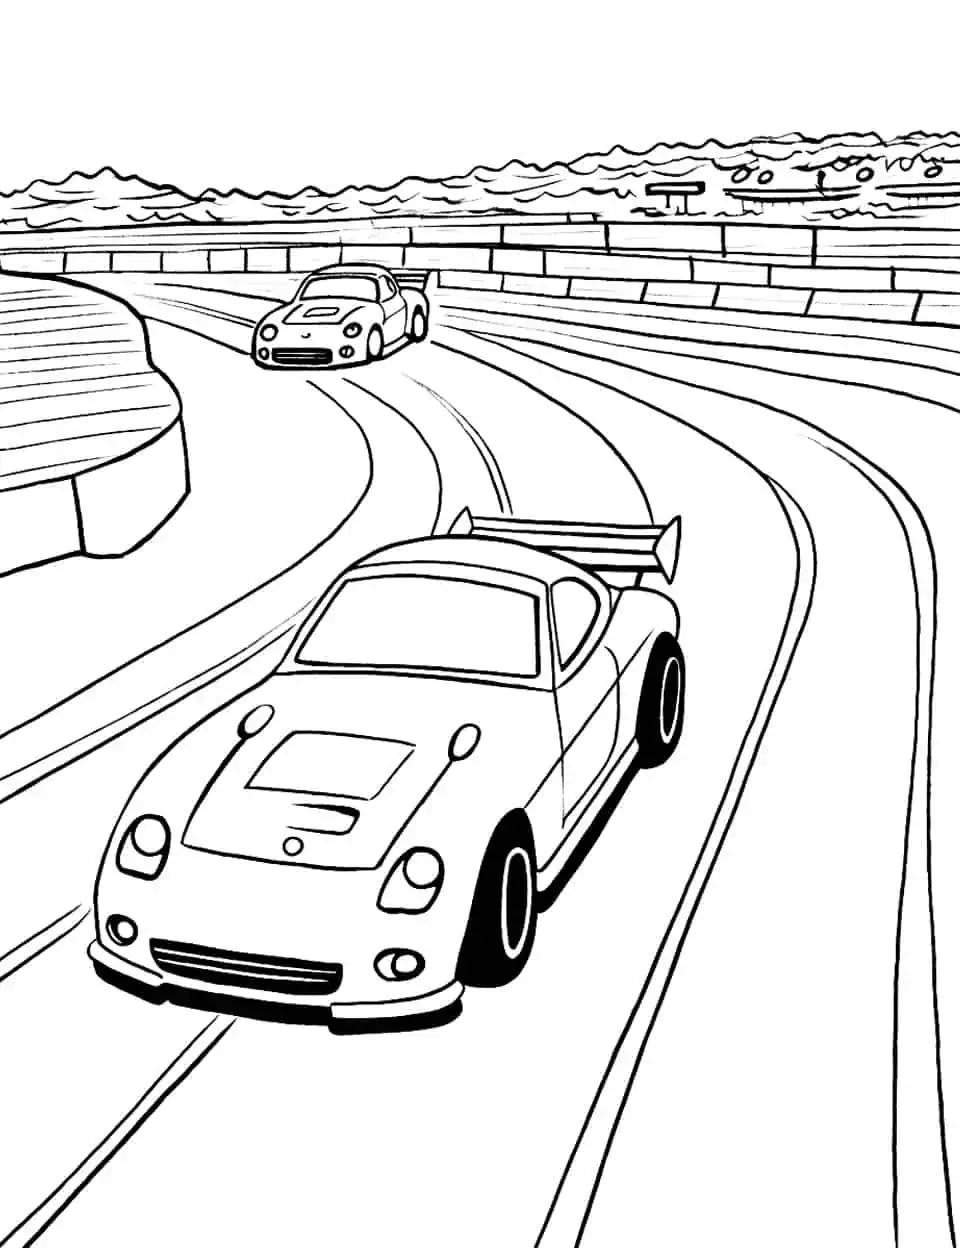 At The Race Track Car Coloring Page - Several race cars racing around a track.